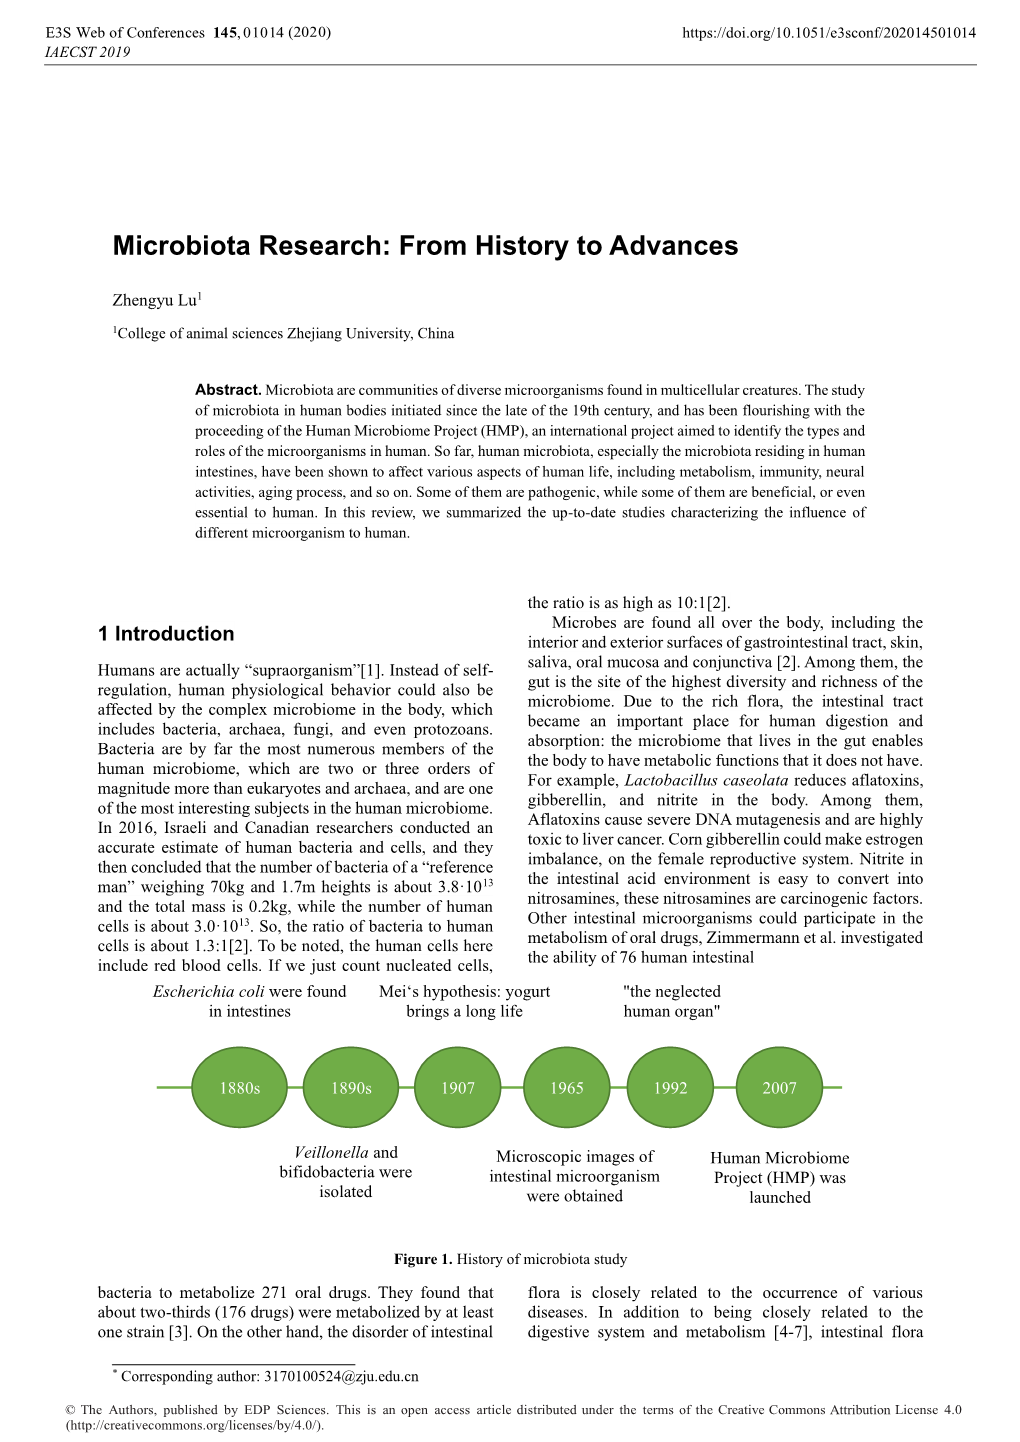 Microbiota Research: from History to Advances